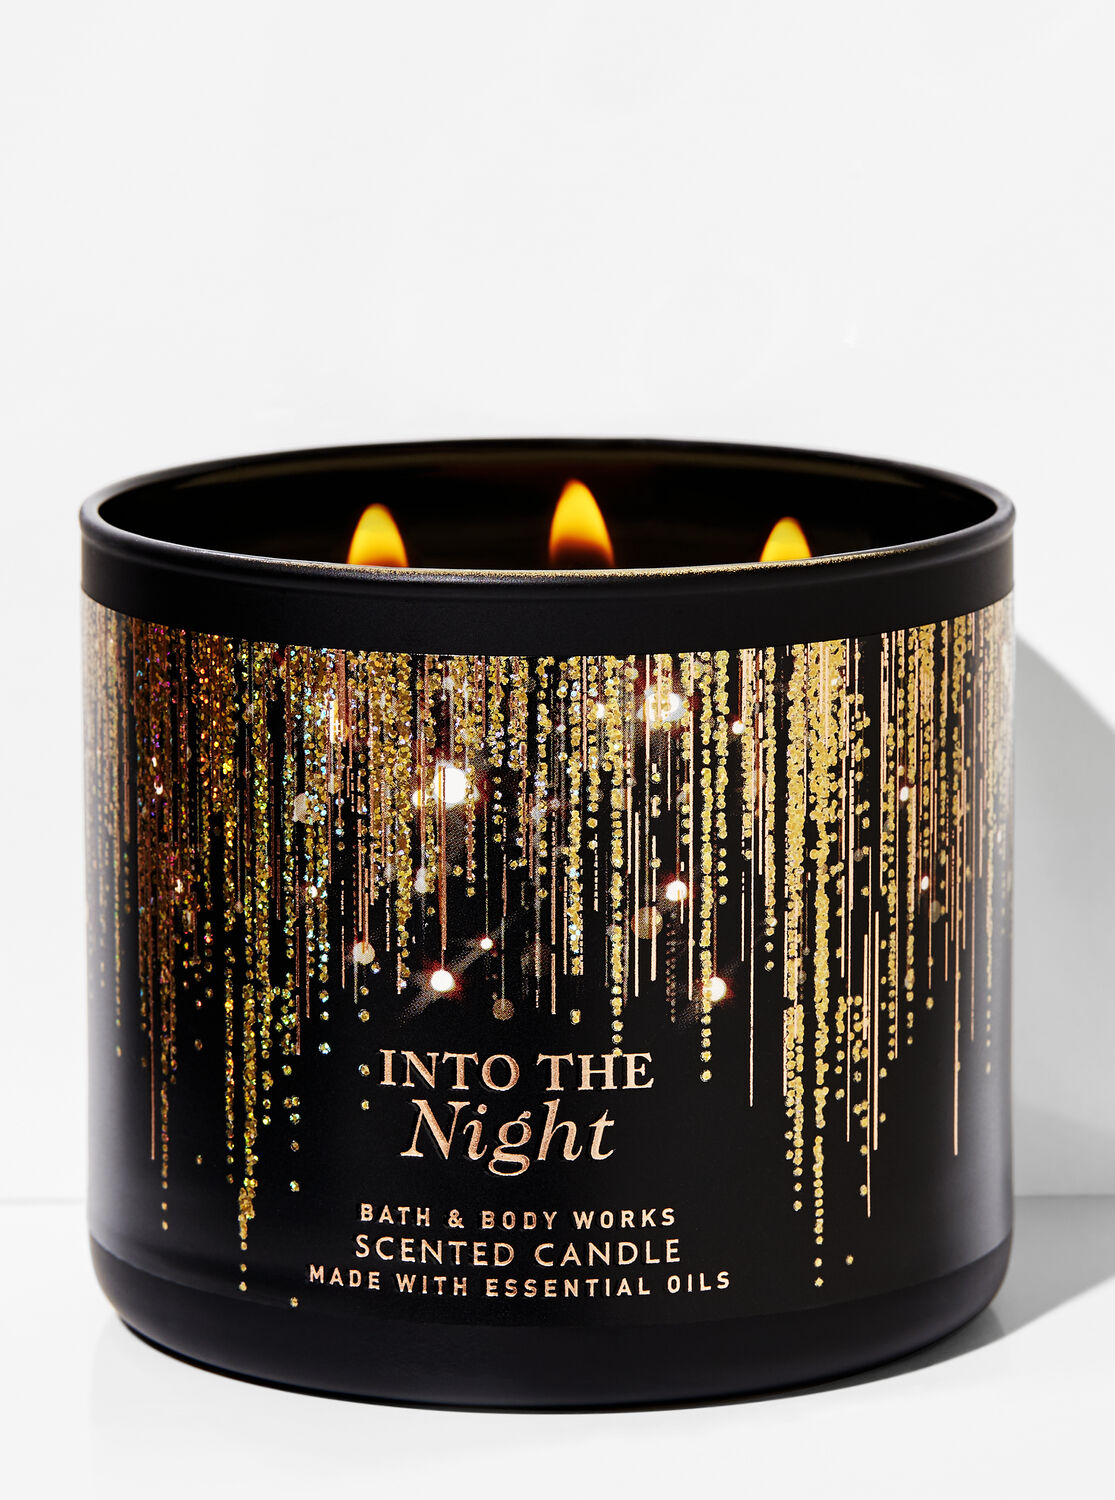 Bath & Body Works 3 Wick Candle Muse Beauty